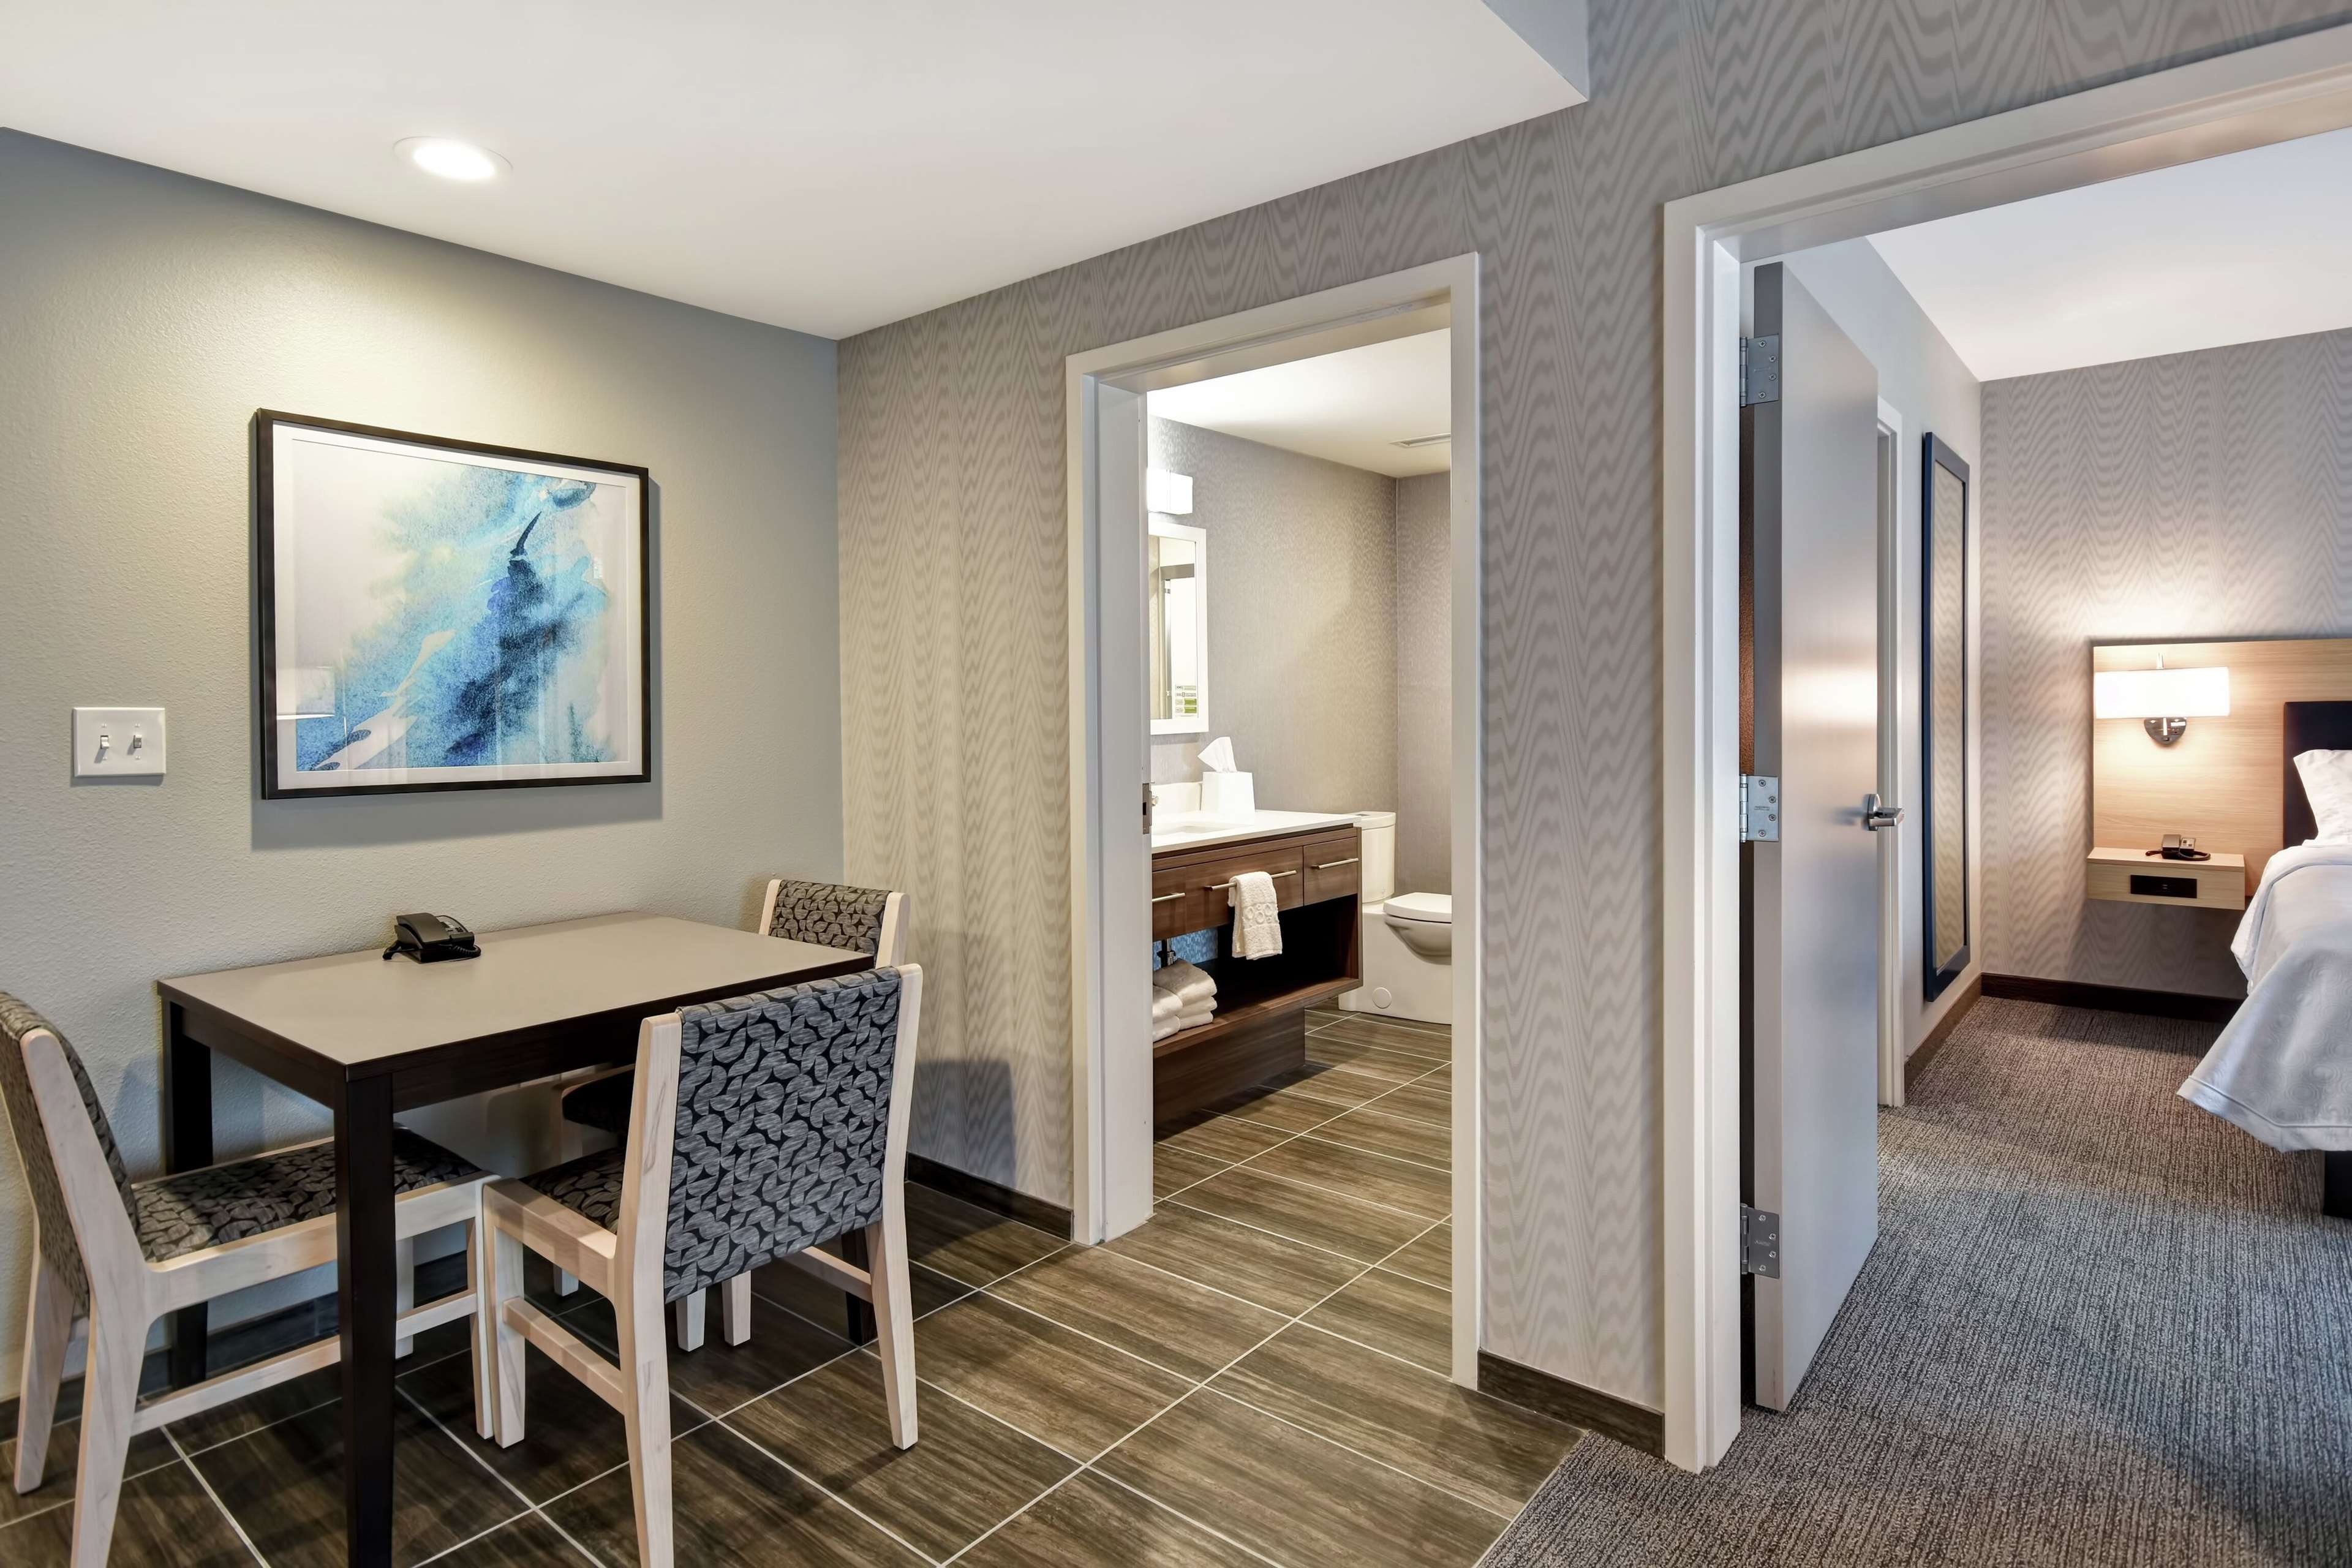 Home2 Suites By Hilton Georgetown Photo